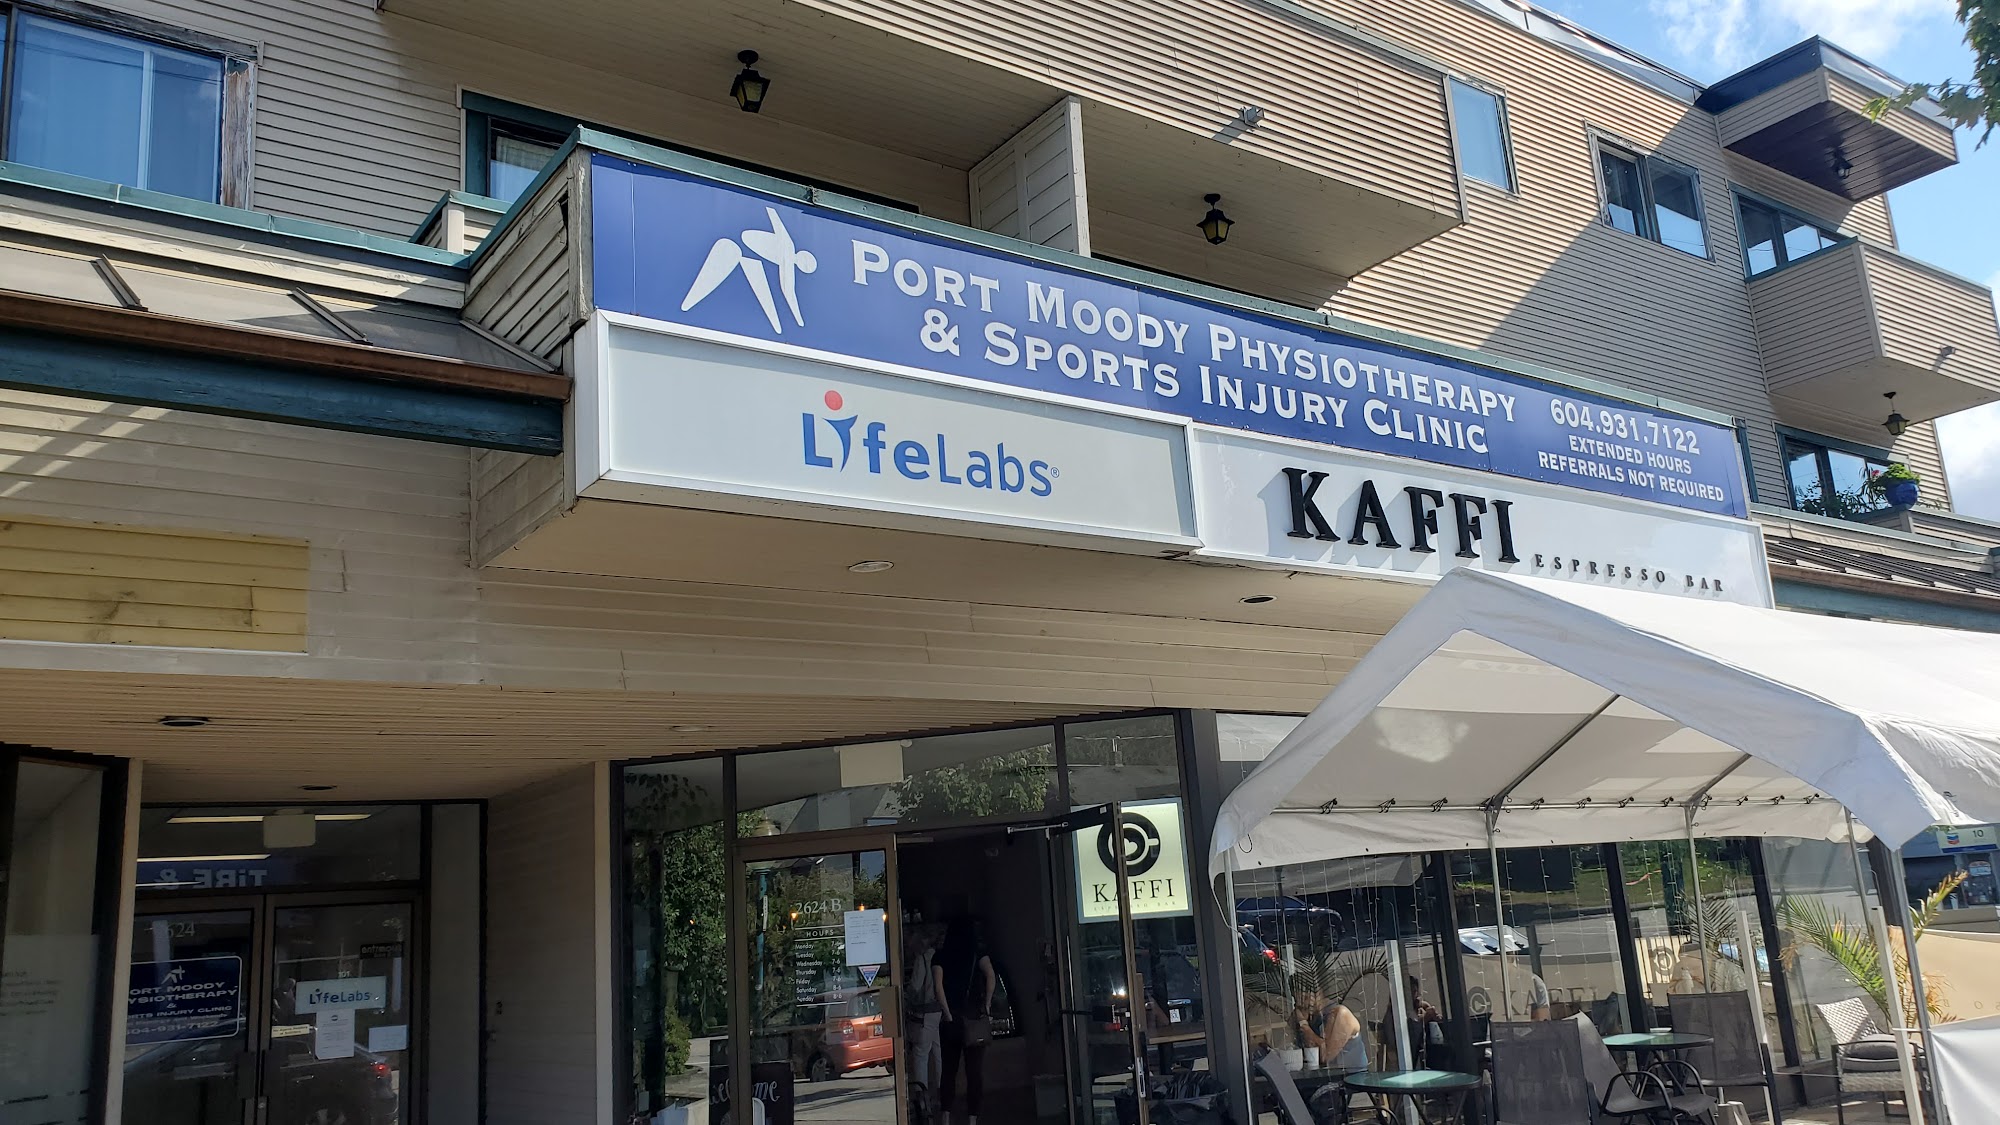 Port Moody Physiotherapy & Sports Injury Clinic - Services